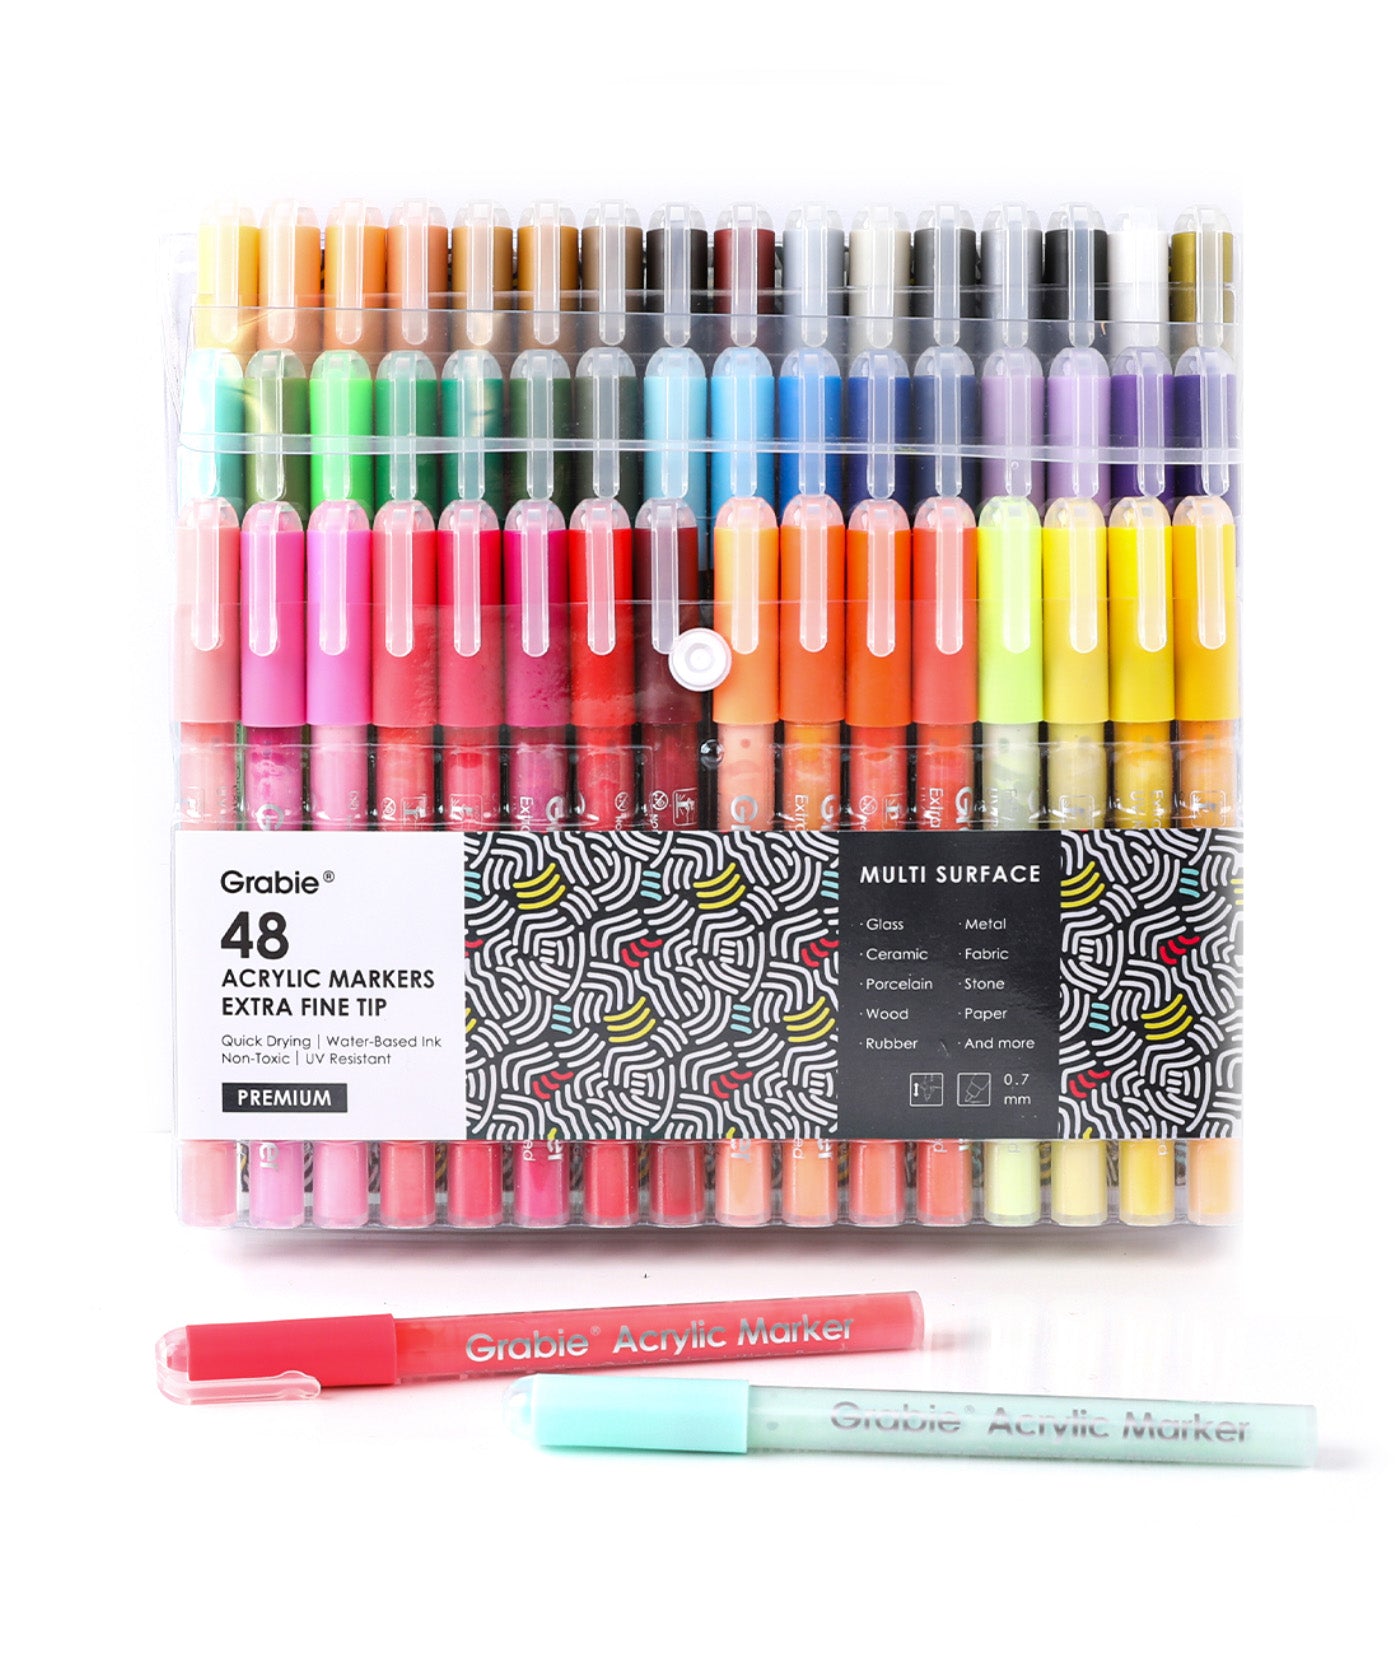 Reviewing the @grabieofficial 28 Colors Acrylic Paint Marker Set w/ 10